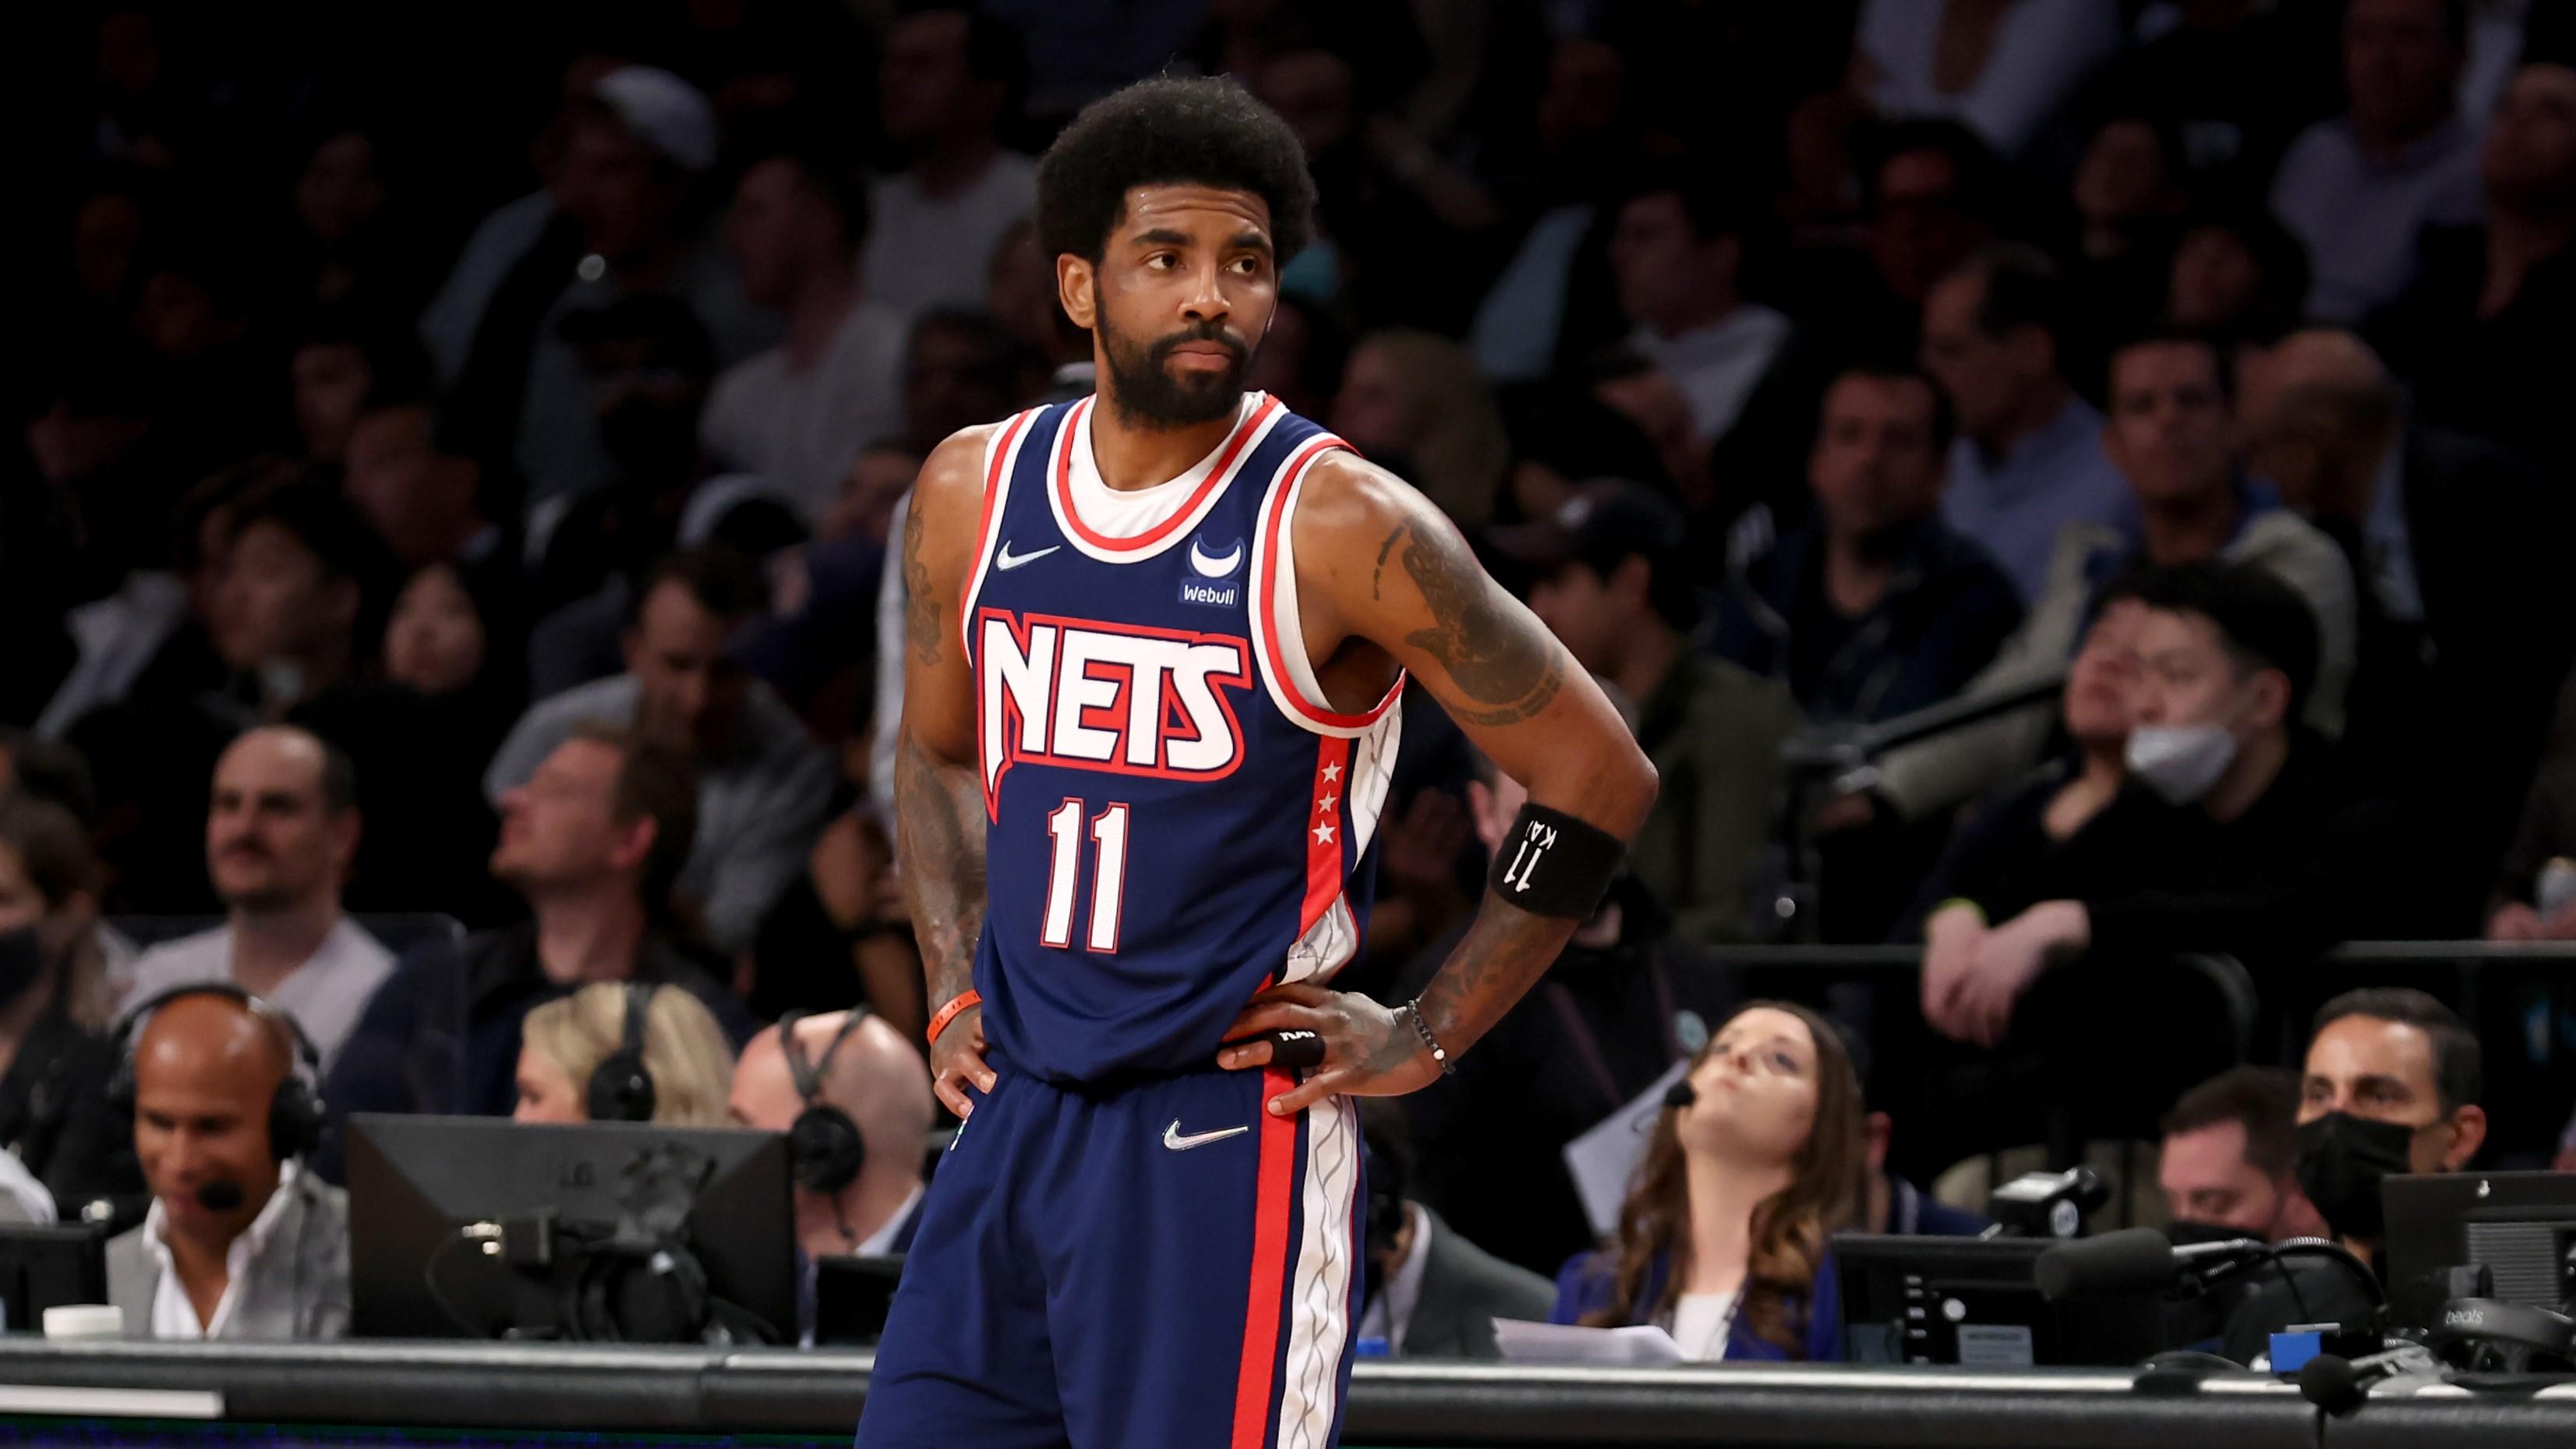 Apr 25, 2022; Brooklyn, New York, USA; Brooklyn Nets guard Kyrie Irving (11) reacts during the second quarter of game four of the first round of the 2022 NBA playoffs against the Boston Celtics at Barclays Center. Mandatory Credit: Brad Penner-USA TODAY Sports / Brad Penner-USA TODAY Sports